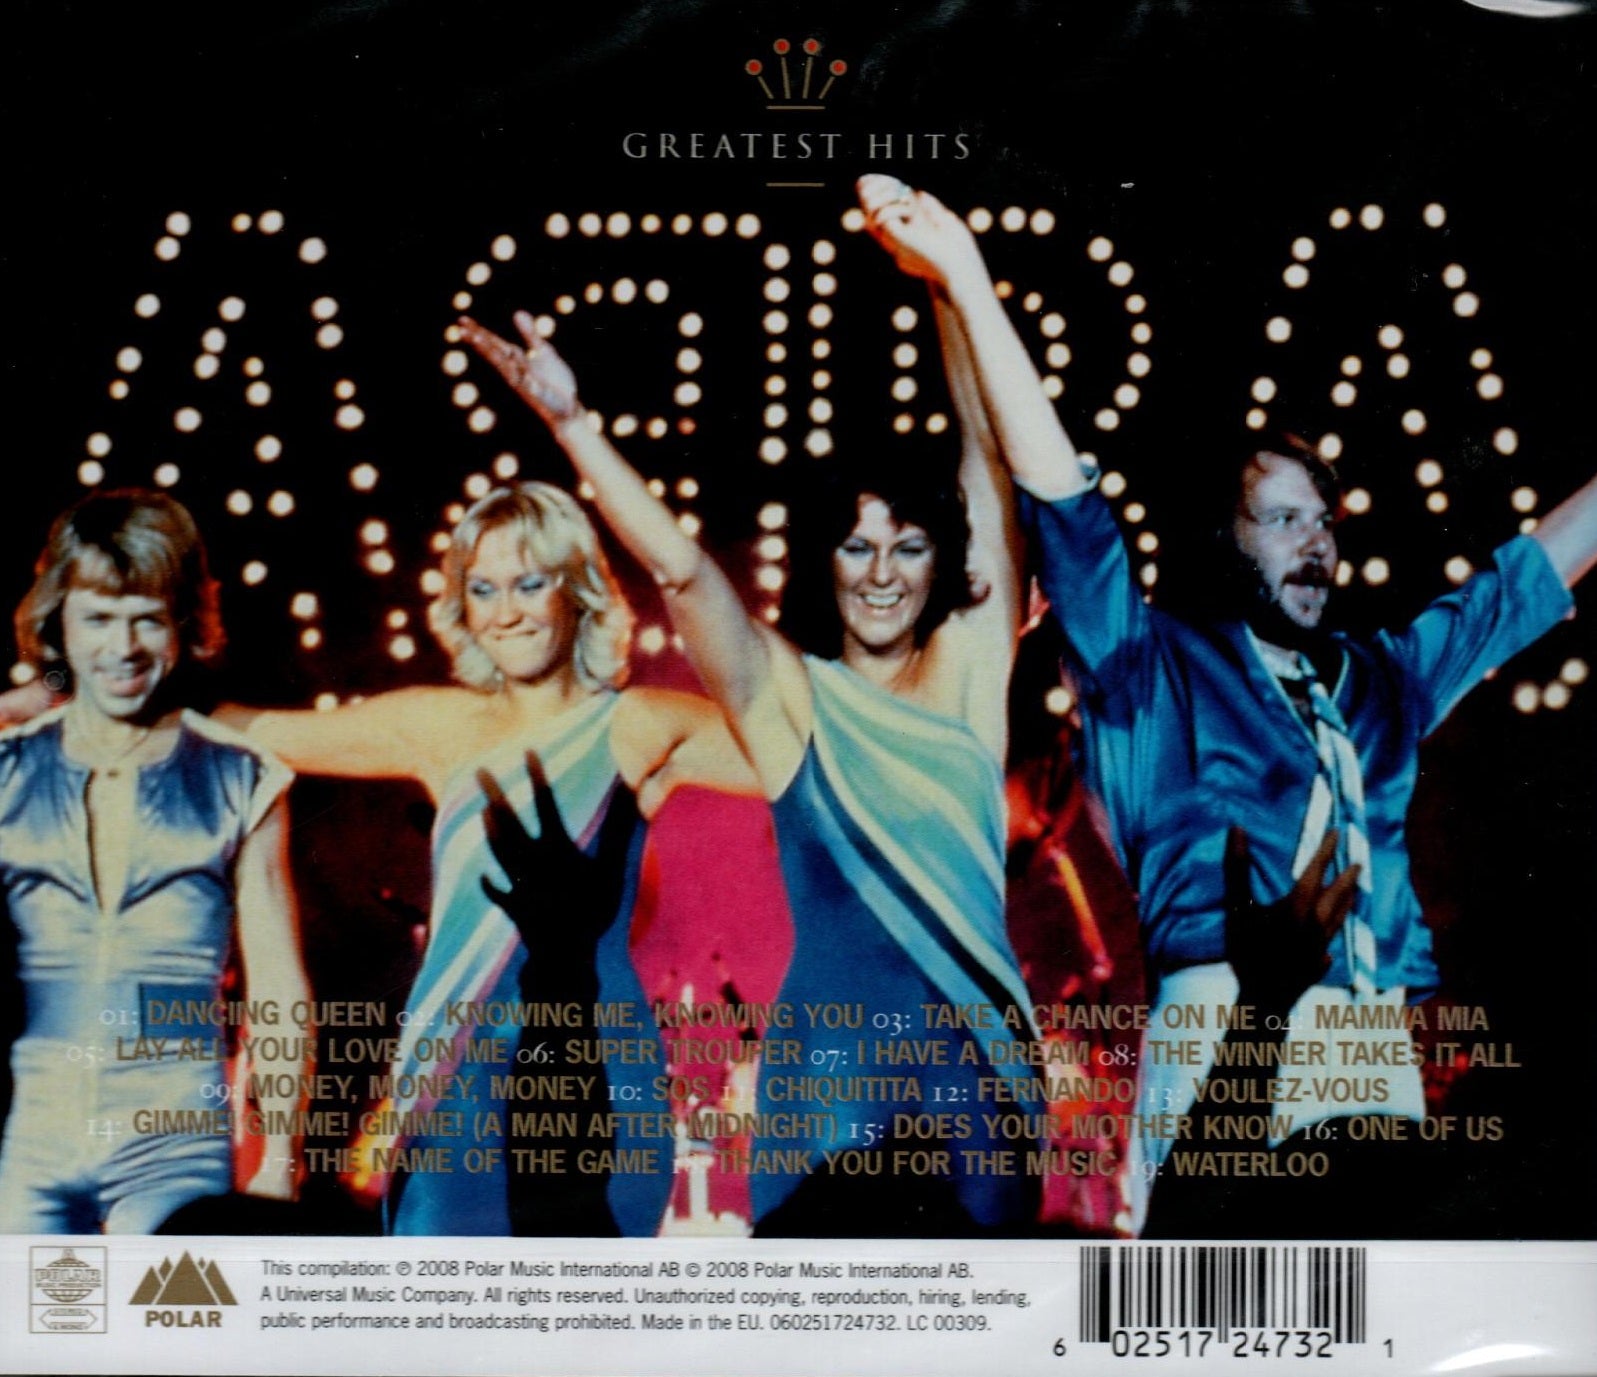 CD ABBA – Gold (Greatest Hits)